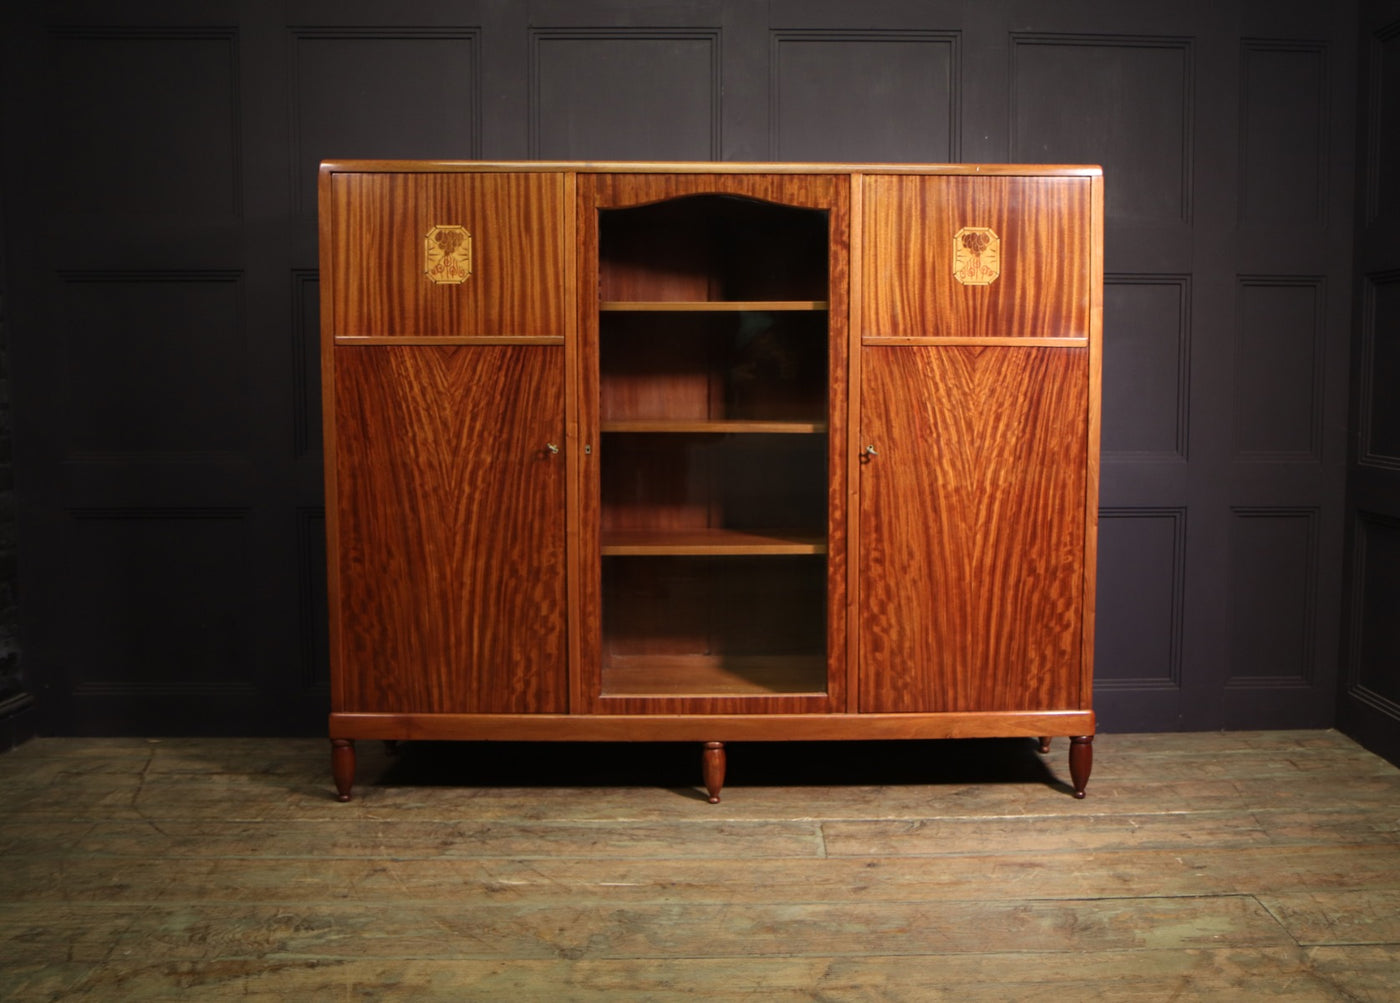 French Art Deco Library Bookcase by Maurice Dufrene